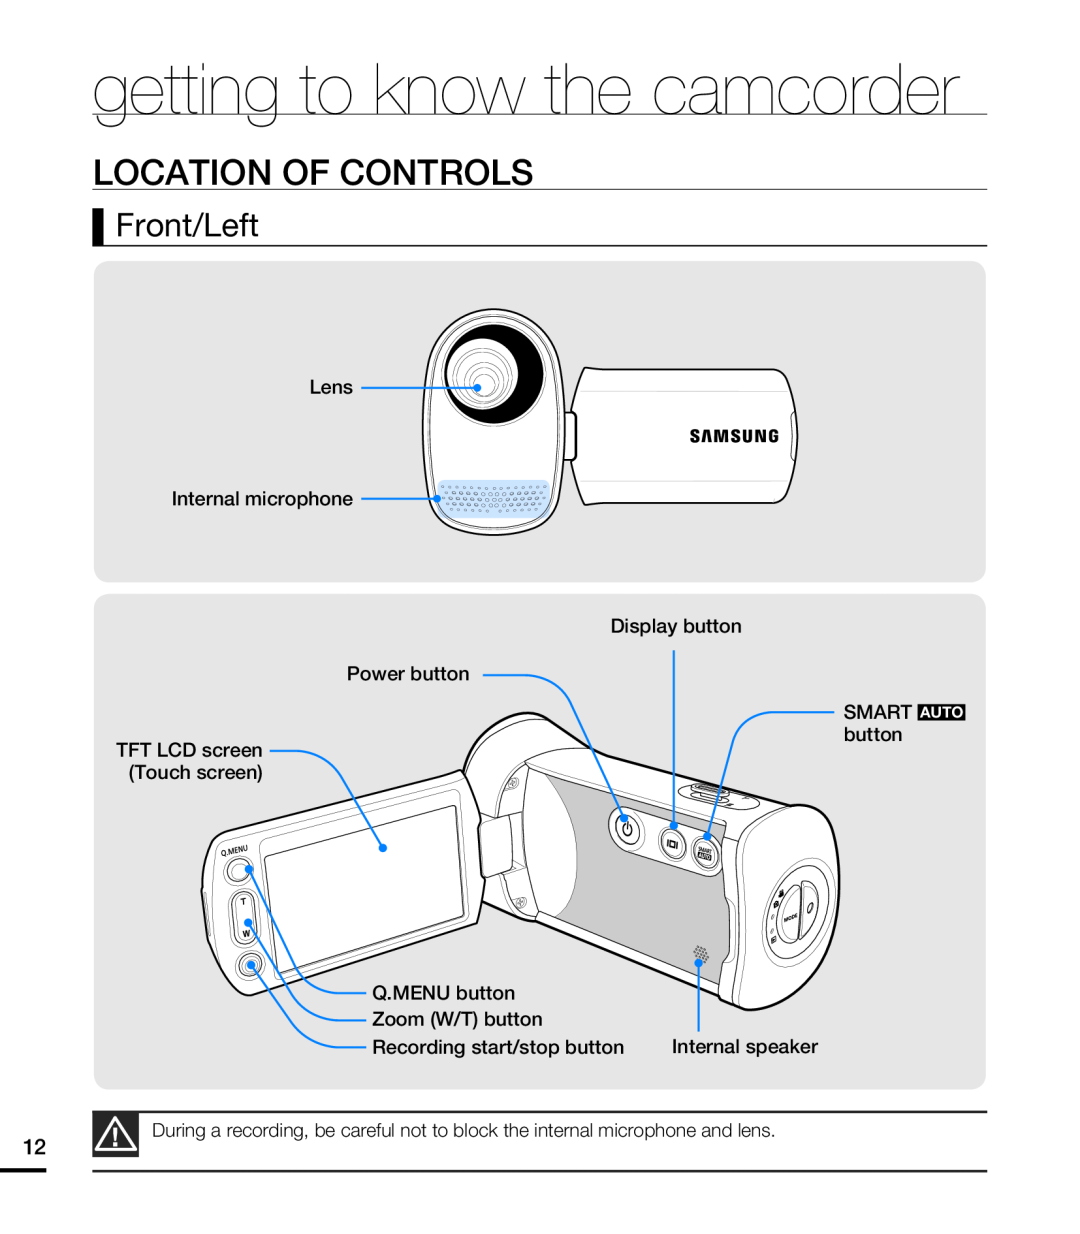 Samsung HMX-T10OP/XER Location Of Controls, Front/Left, getting to know the camcorder, SMART AUTO button, Q.MENU button 